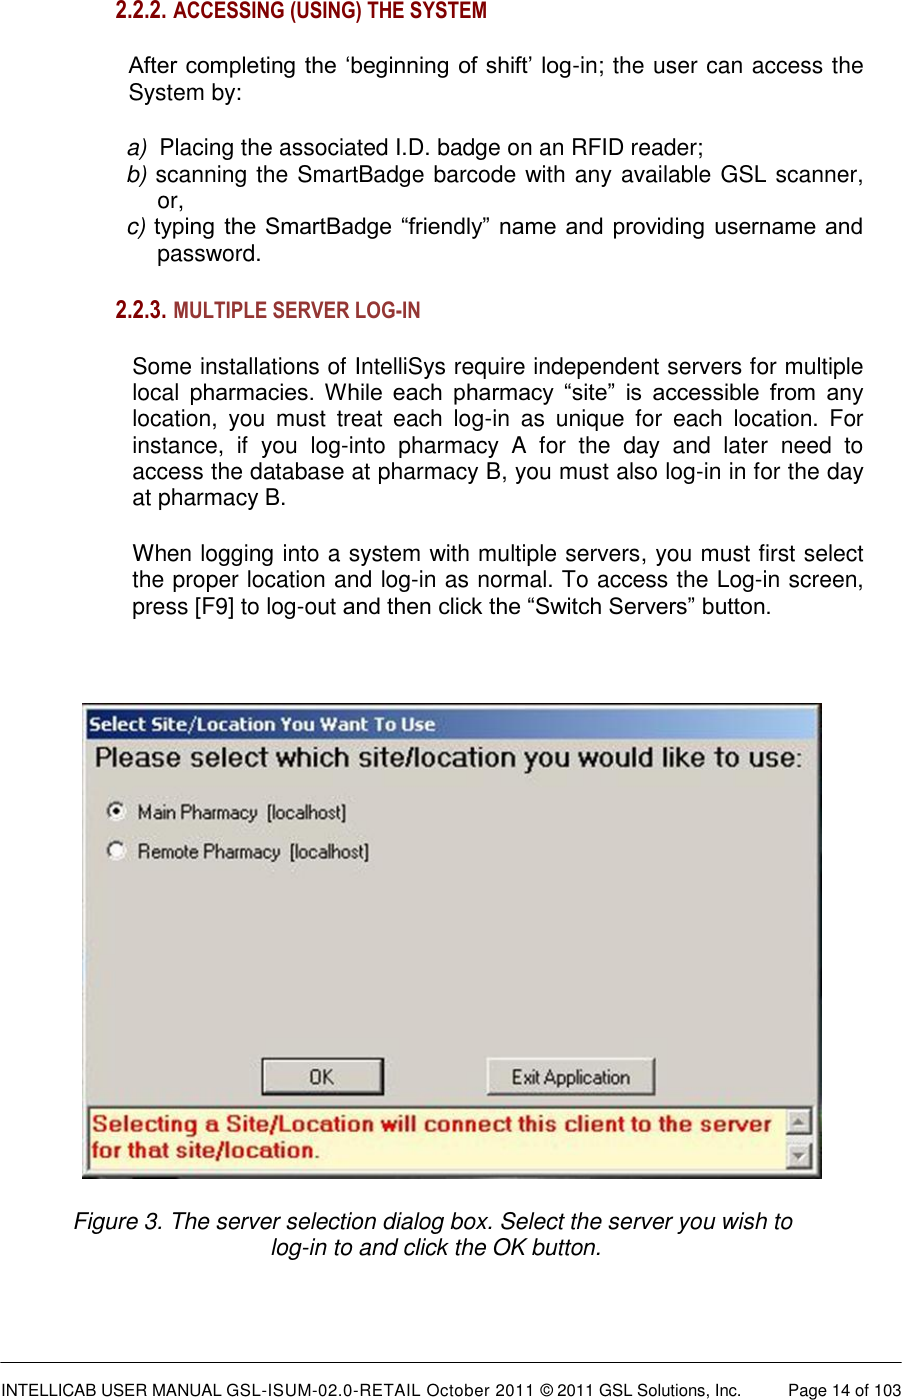  INTELLICAB USER MANUAL GSL-ISUM-02.0-RETAIL October 2011 © 2011 GSL Solutions, Inc.   Page 14 of 103   2.2.2.  ACCESSING (USING) THE SYSTEM   After completing the ‘beginning of shift’ log-in; the user can access the System by:  a)  Placing the associated I.D. badge on an RFID reader;  b) scanning the SmartBadge barcode with any available GSL scanner,   or,  c) typing the SmartBadge “friendly” name and providing  username and password. 2.2.3.  MULTIPLE SERVER LOG-IN  Some installations of IntelliSys require independent servers for multiple local  pharmacies.  While  each  pharmacy  “site”  is  accessible  from  any location,  you  must  treat  each  log-in  as  unique  for  each  location.  For instance,  if  you  log-into  pharmacy  A  for  the  day  and  later  need  to access the database at pharmacy B, you must also log-in in for the day at pharmacy B. When logging into a system with multiple servers, you must first select the proper location and log-in as normal. To access the Log-in screen, press [F9] to log-out and then click the “Switch Servers” button.   Figure 3. The server selection dialog box. Select the server you wish to  log-in to and click the OK button. 